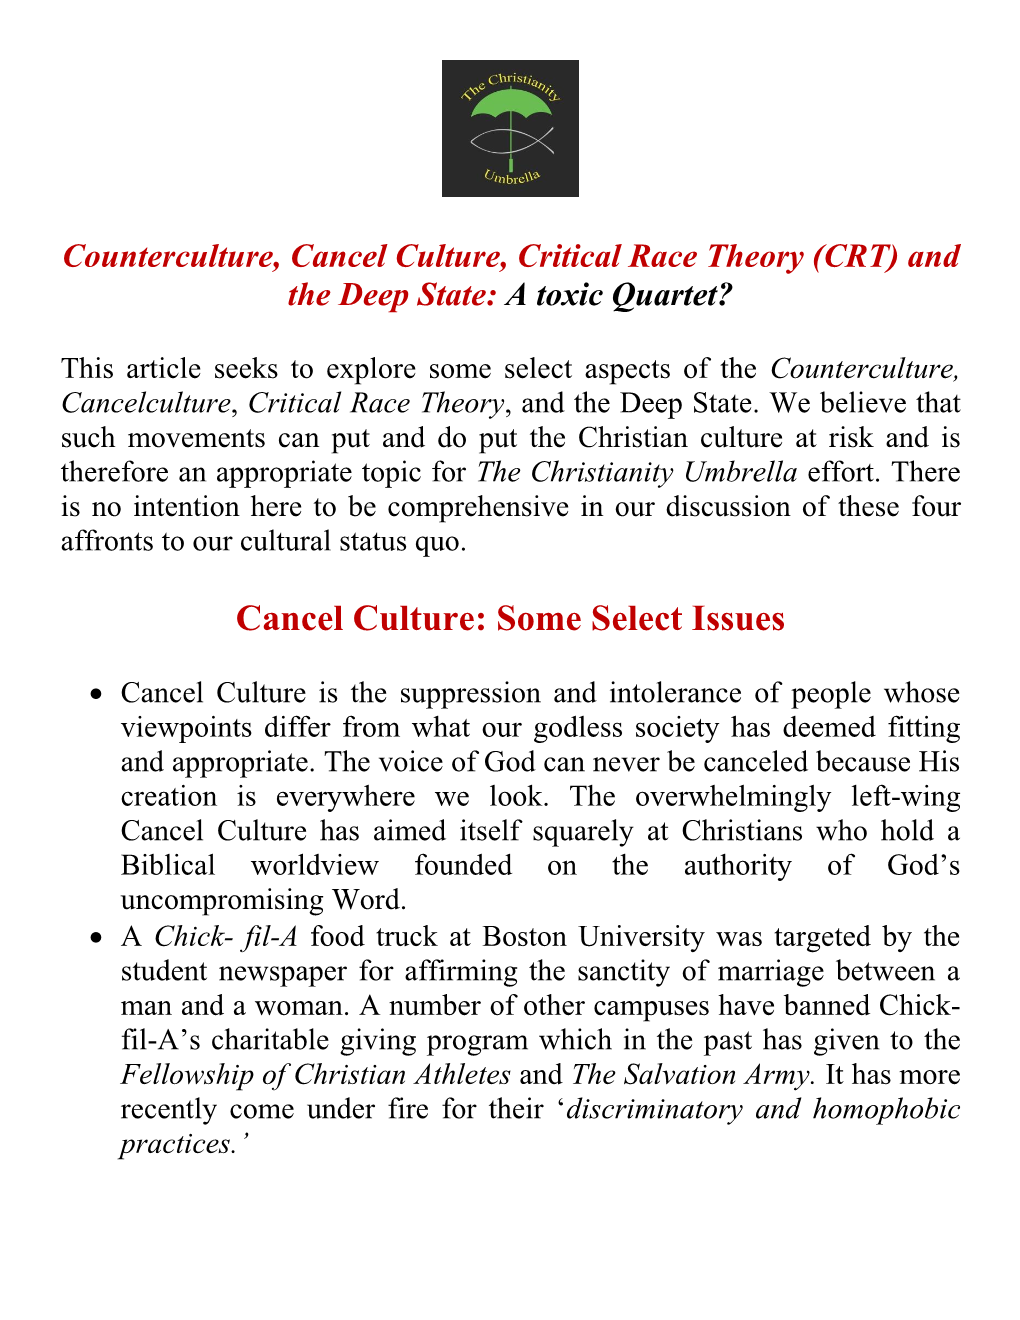 Counterculture, Cancel Culture, Critical Race Theory (CRT) and the Deep State: a Toxic Quartet?